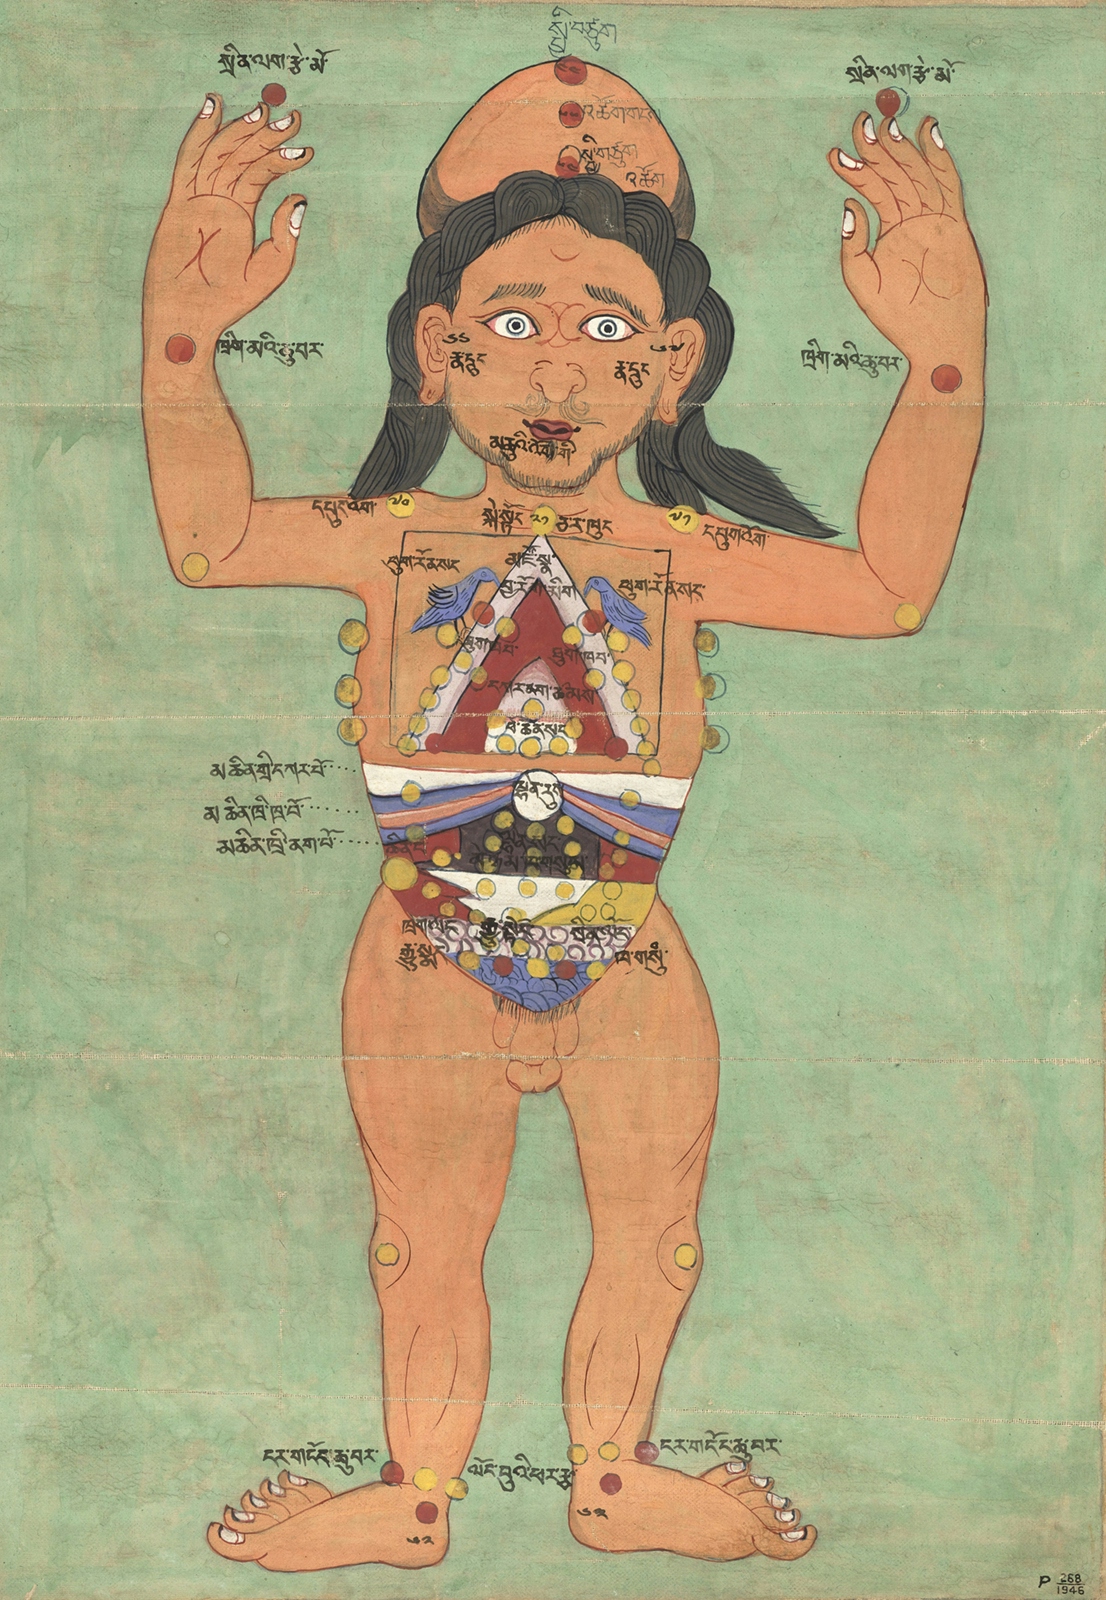 A colour illustration showing a naked man with his arms raised, with several points marked on his body in different colours.